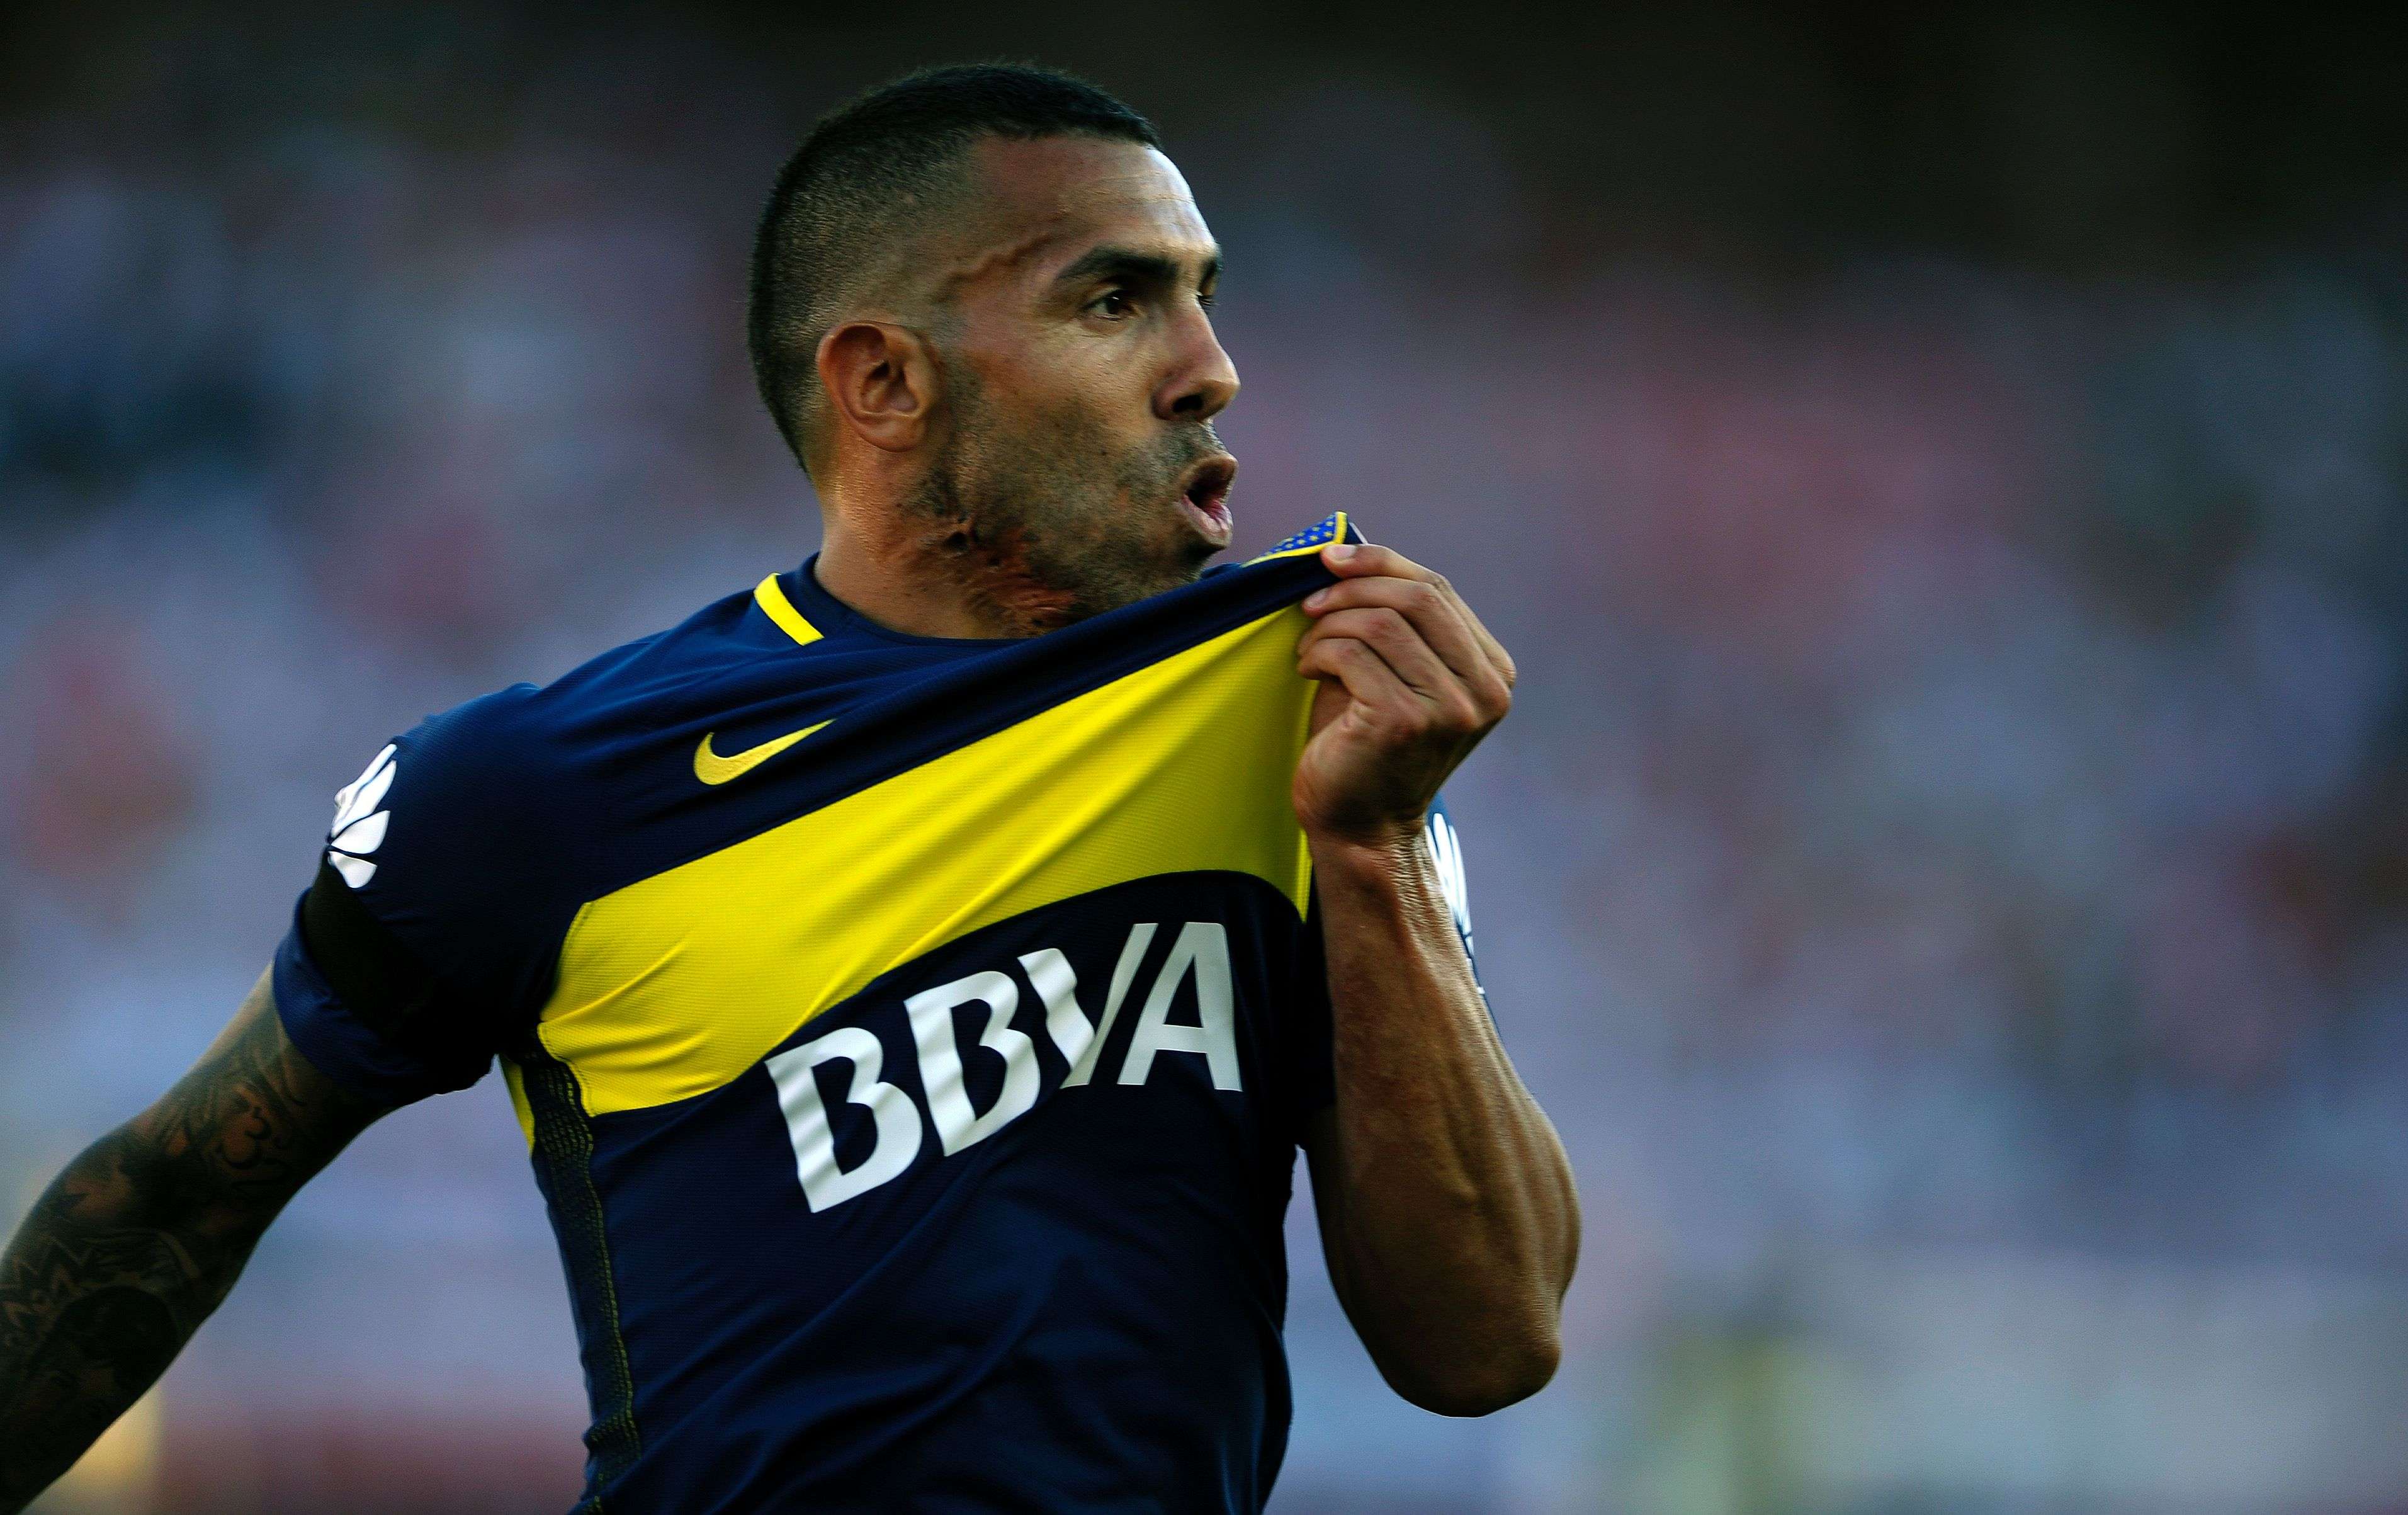 Boca Juniors' forward Carlos Tevez kisses the badge after scoring against city rivals River Plate at the weekend. Photo: AFP